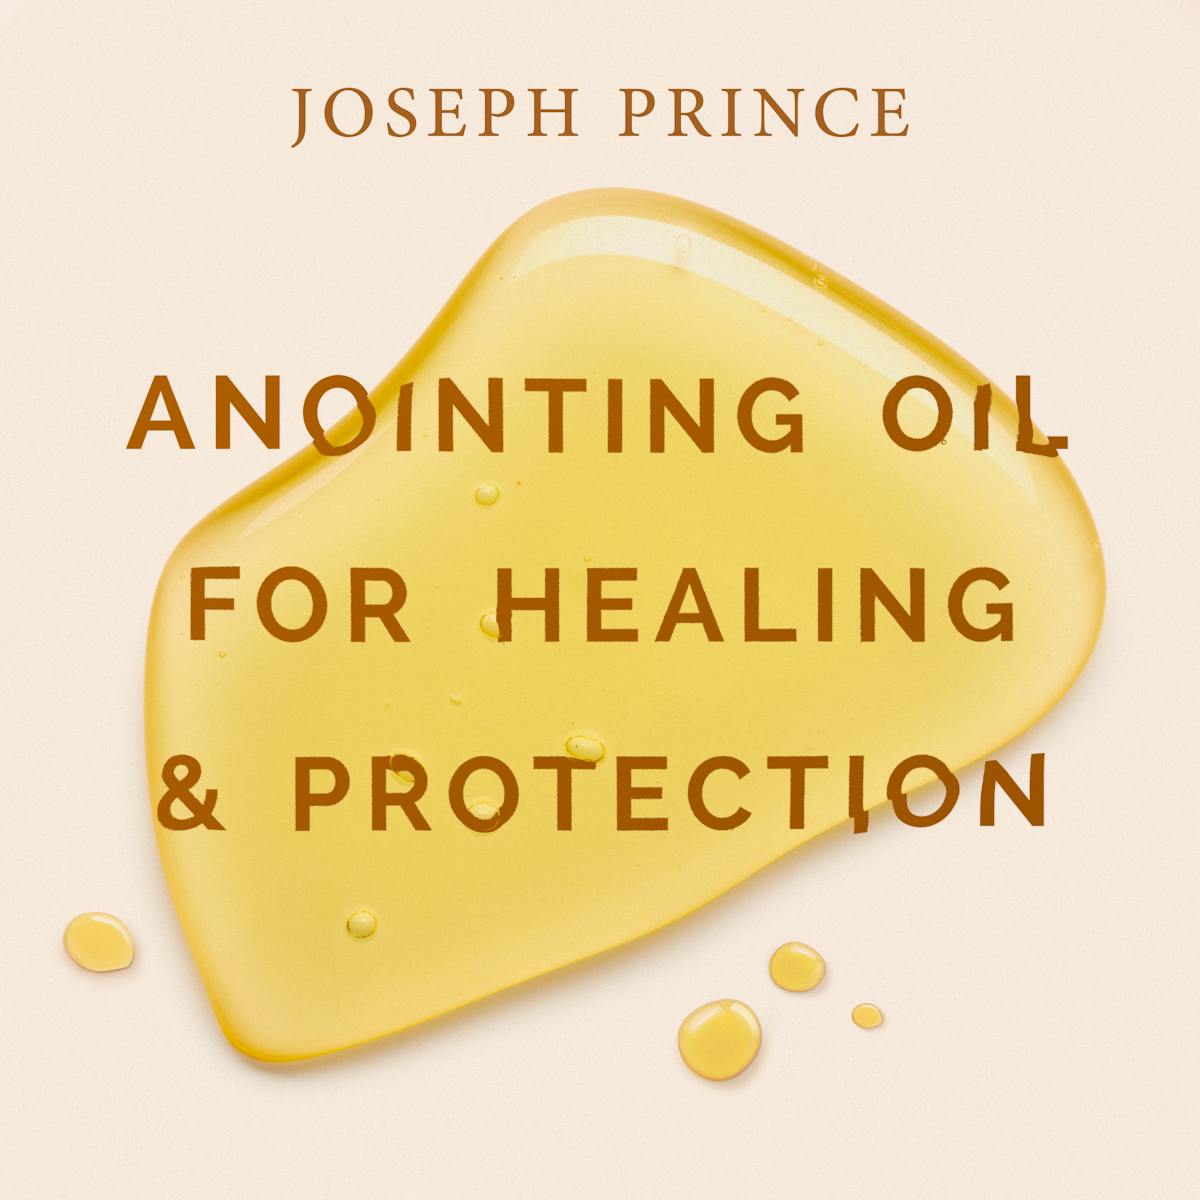 Oil of Wisdom Holy Anointing Oil